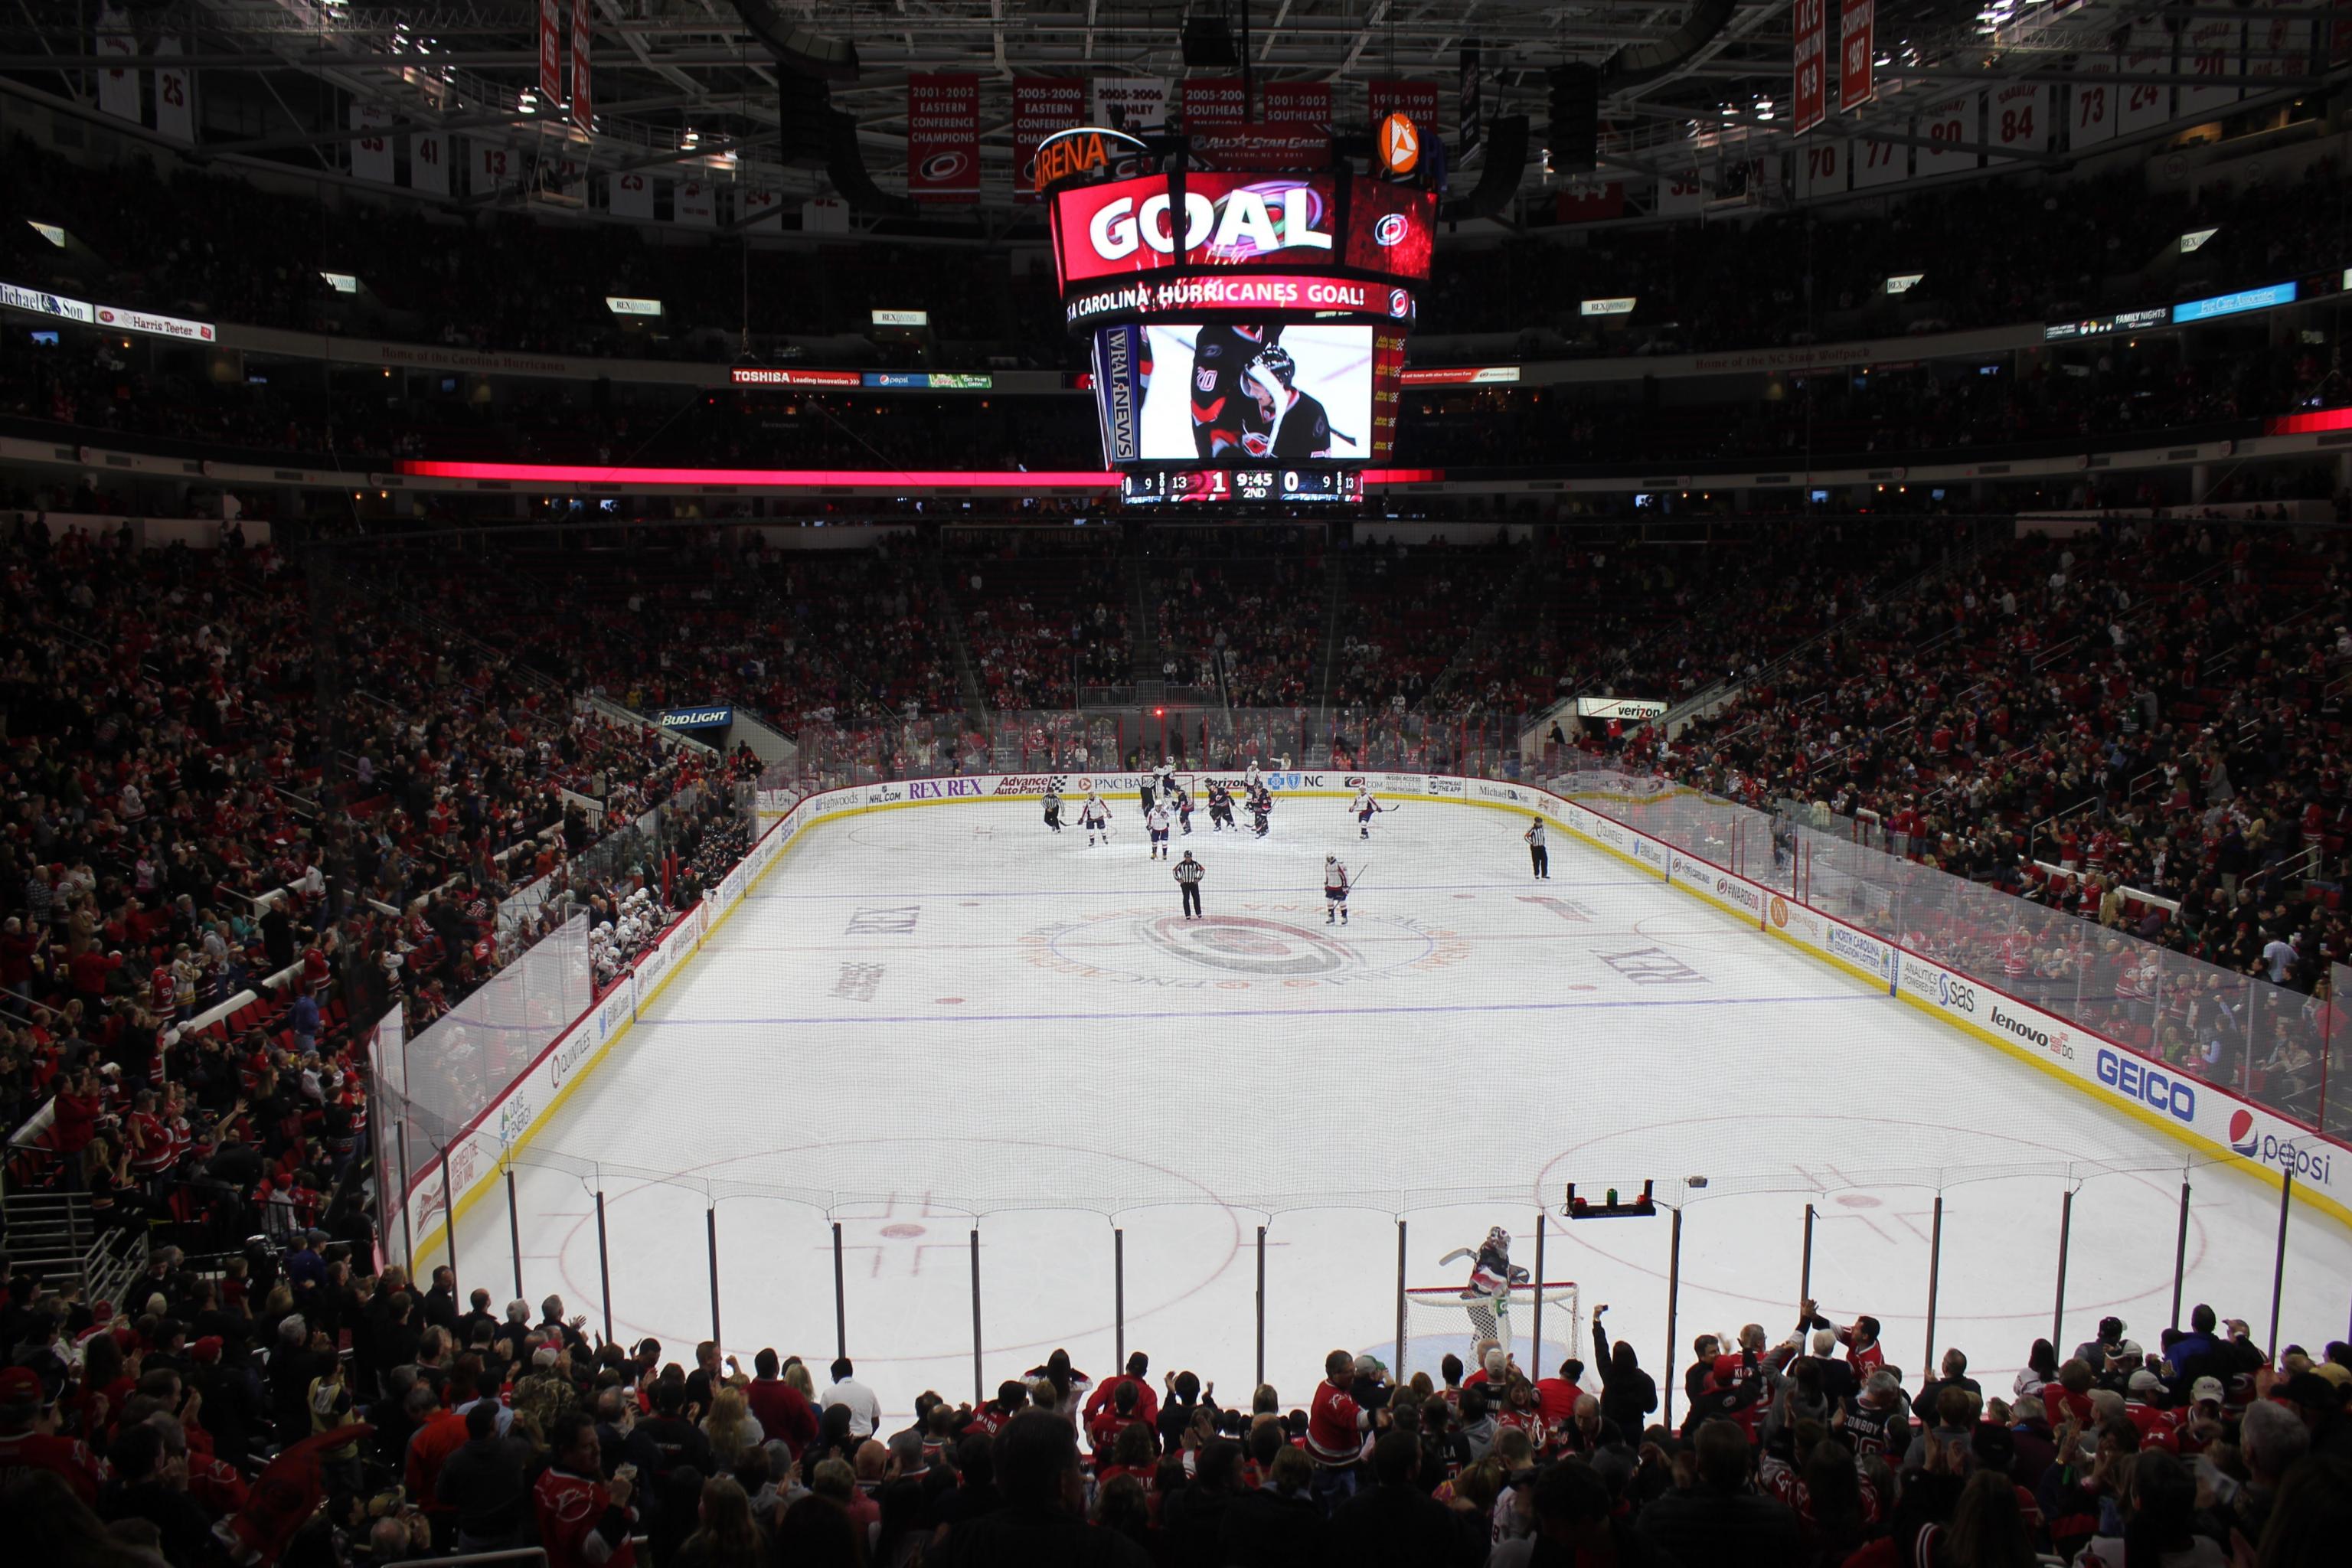 Complete Hockey News on X: The Carolina Hurricanes and PNC Arena have  finalized a new lease agreement through the 2028/29 season. The agreement  was agreed upon in March of 2020 and includes